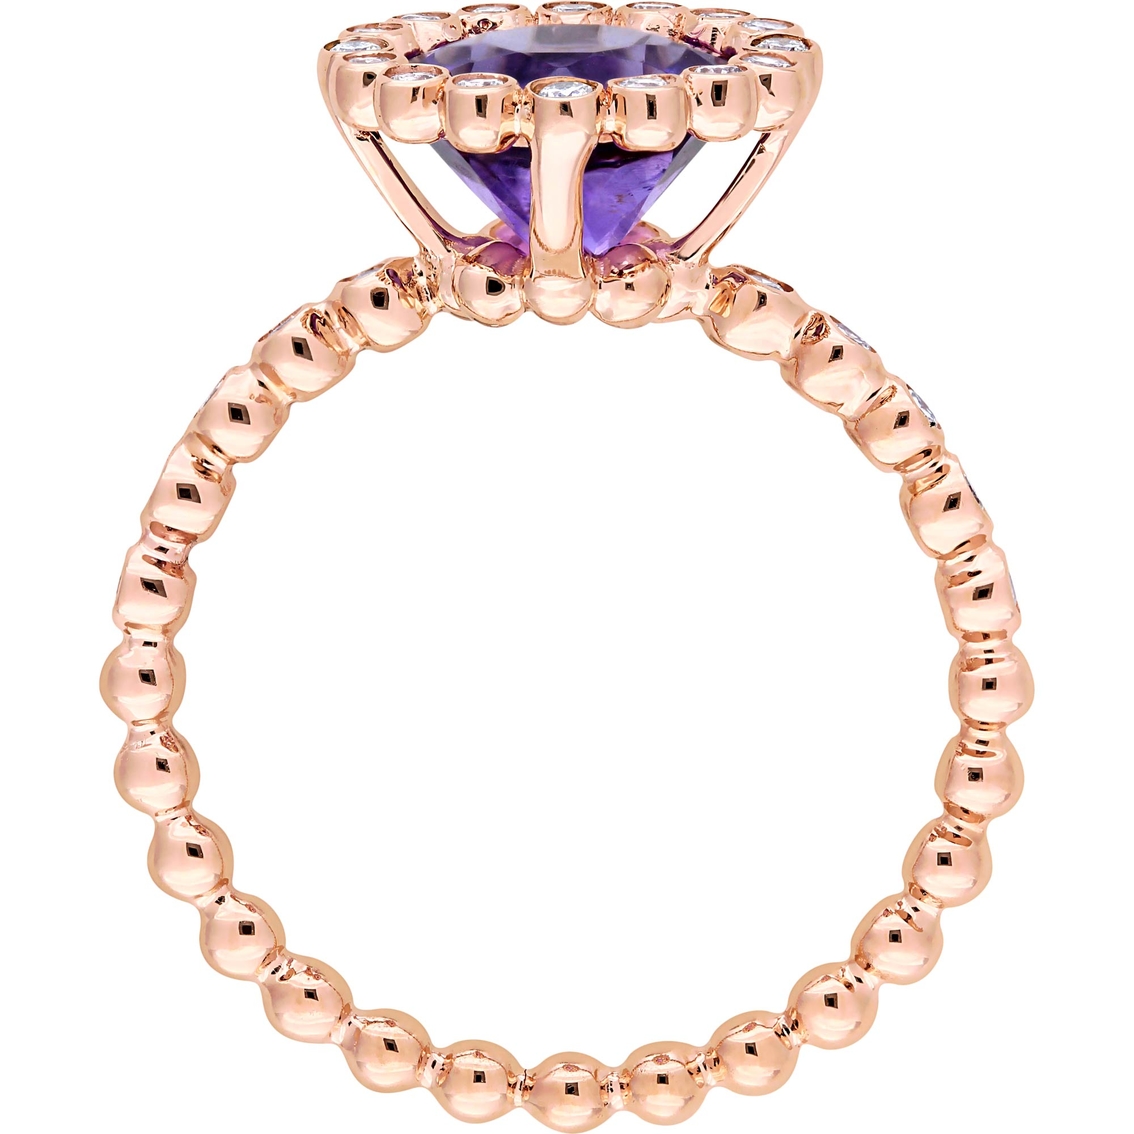 Sofia B. 14K Rose Gold Amethyst and 1/4 CTW Diamond Halo Scalloped Ring - Image 2 of 4